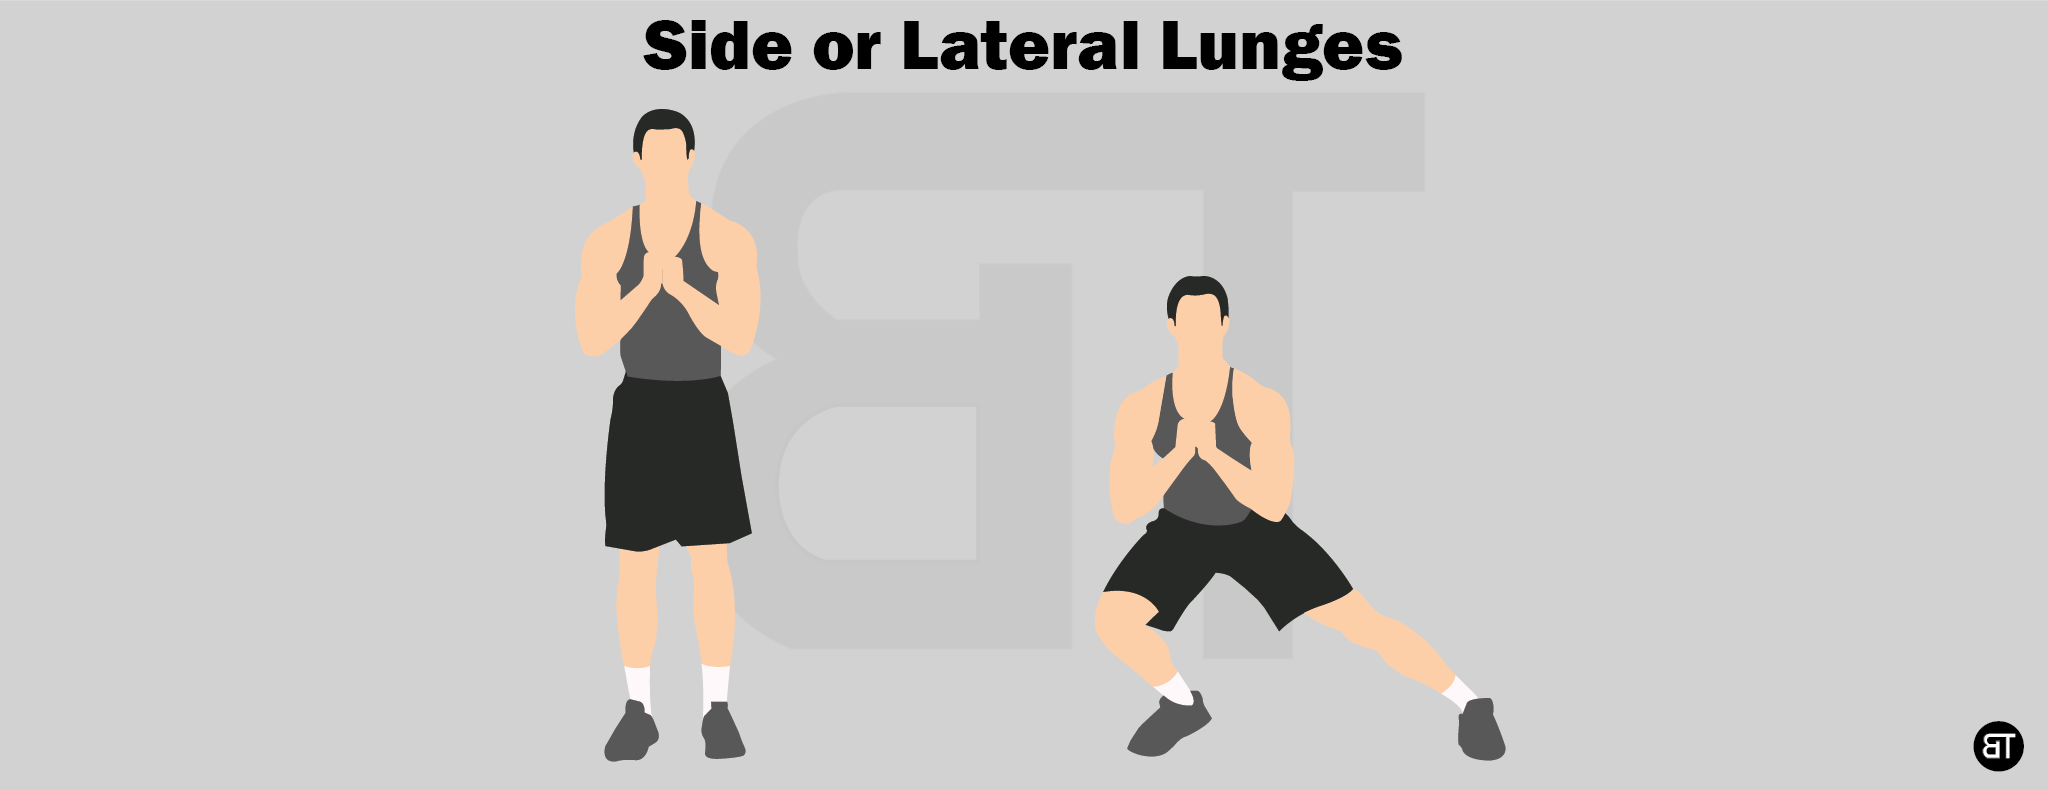 Side Lateral Lunges